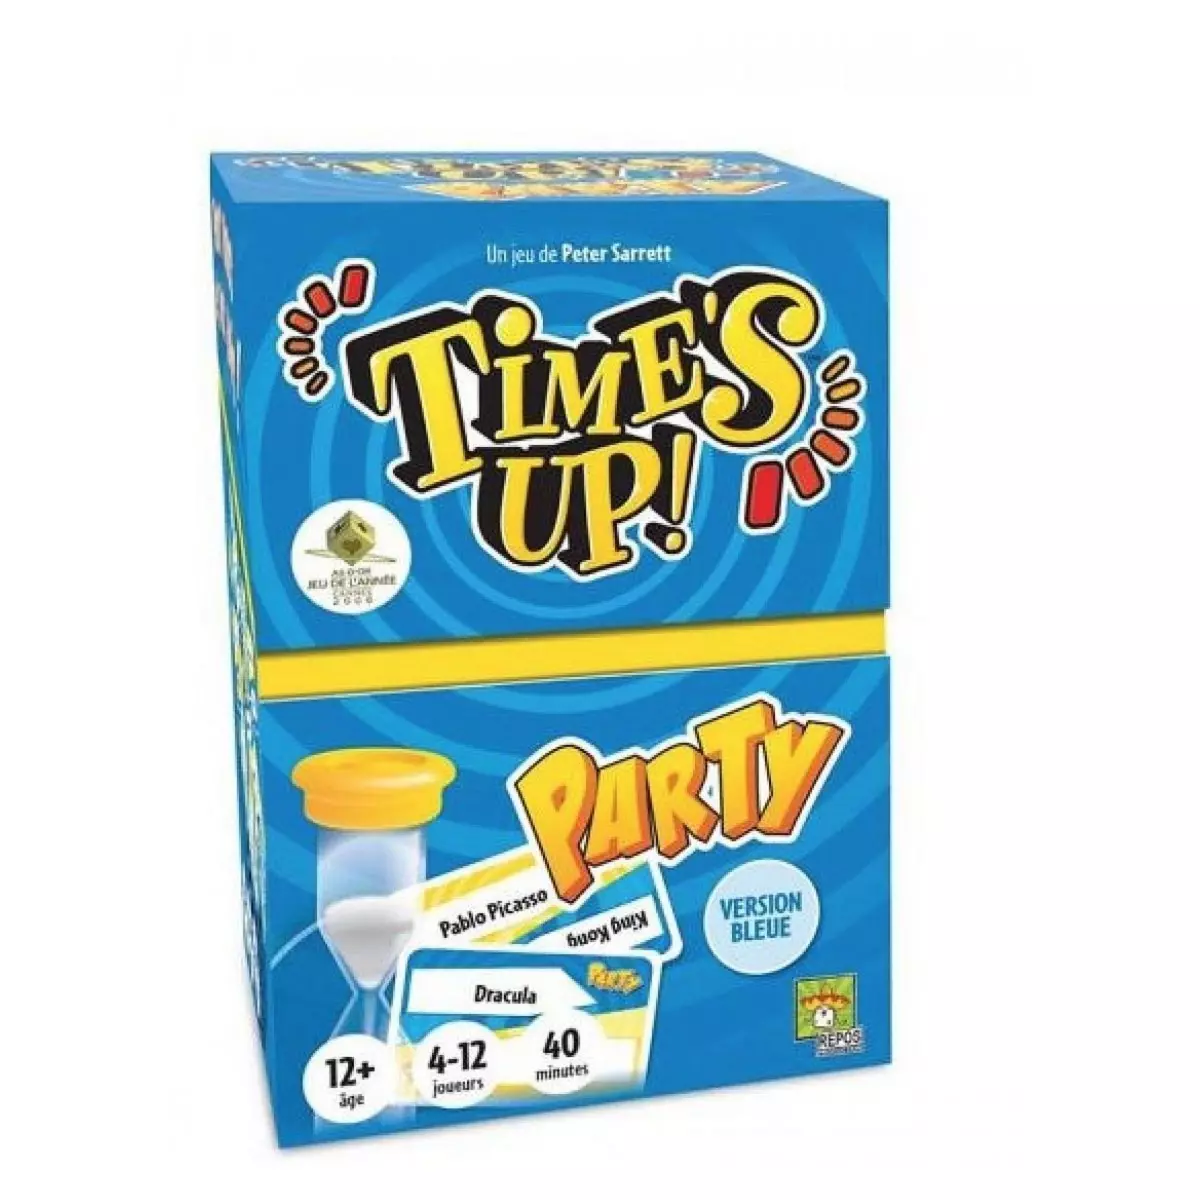 Asmodee Time's up party version bleu